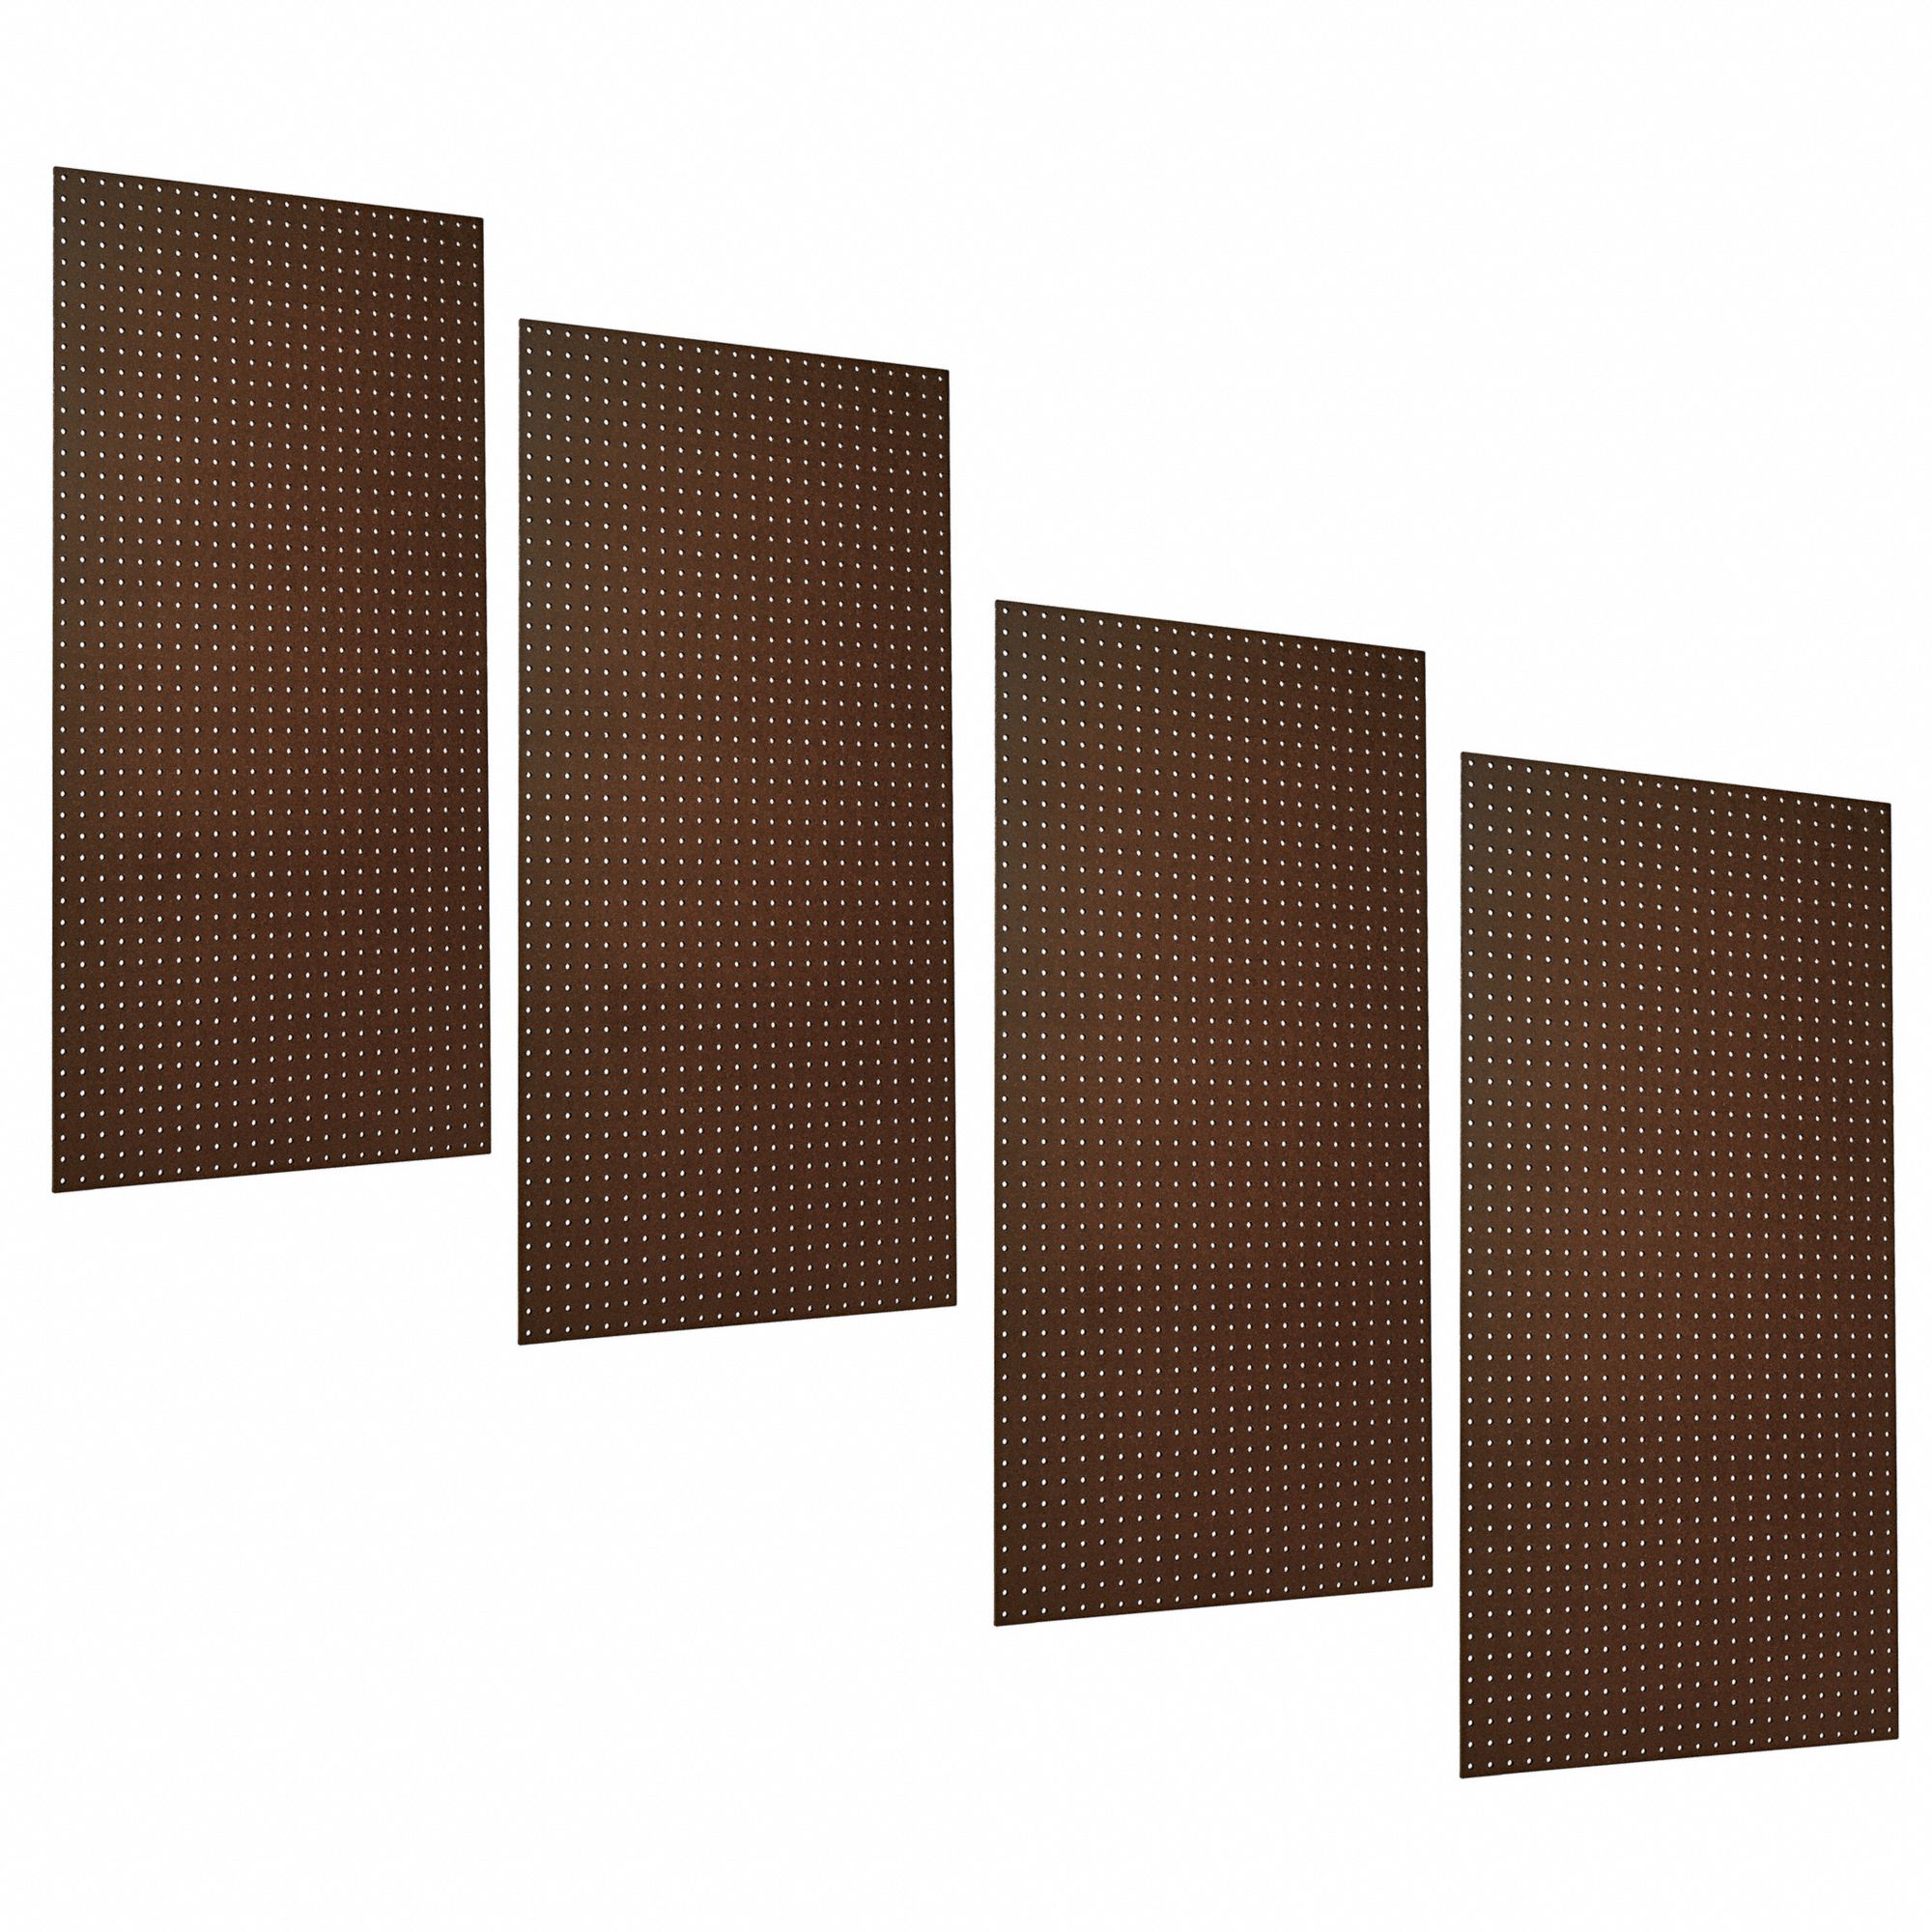 Pegboard Panel: Round, 1/4 in Peg Hole Size, 48 in x 24 in x 1/8 in, Hardwood